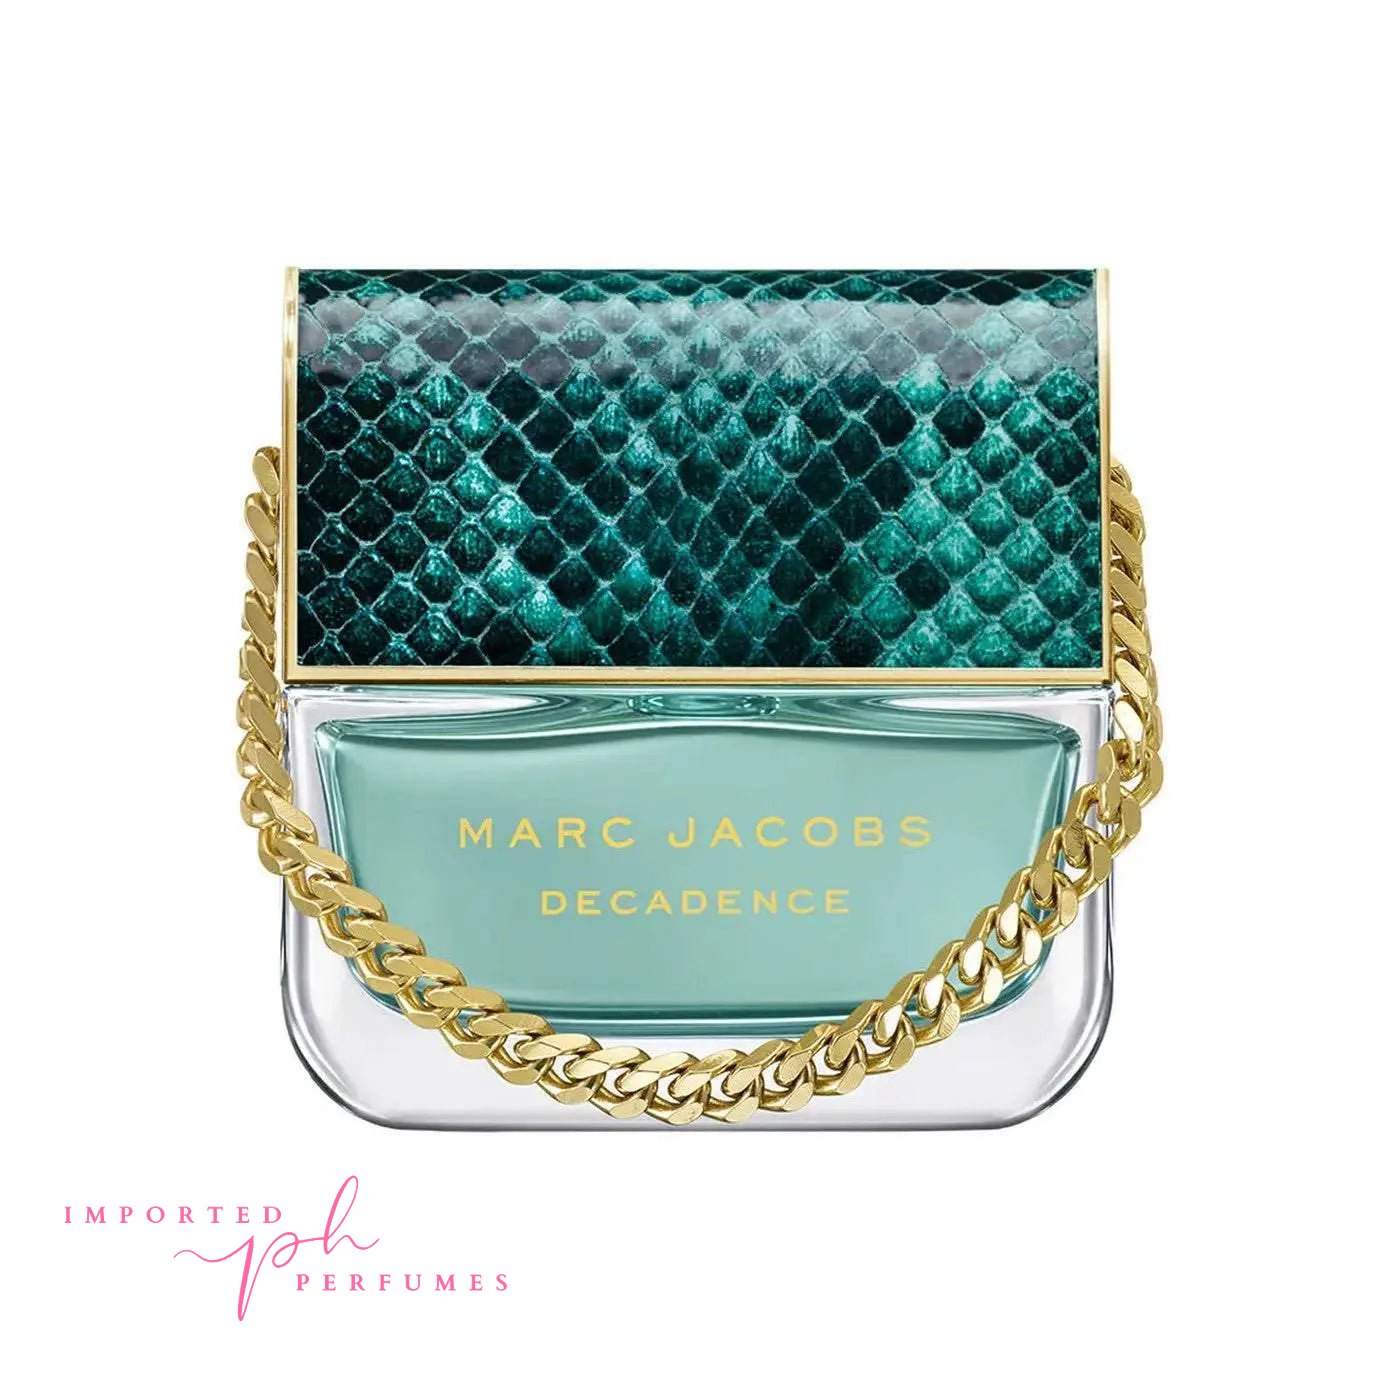 [TESTER] Marc Jacobs Decadence Eau So Decadent For Women100ml-Imported Perfumes Co-Decadence,for women,for wone,for woone,Marc Jacobs,test,TESTER,women